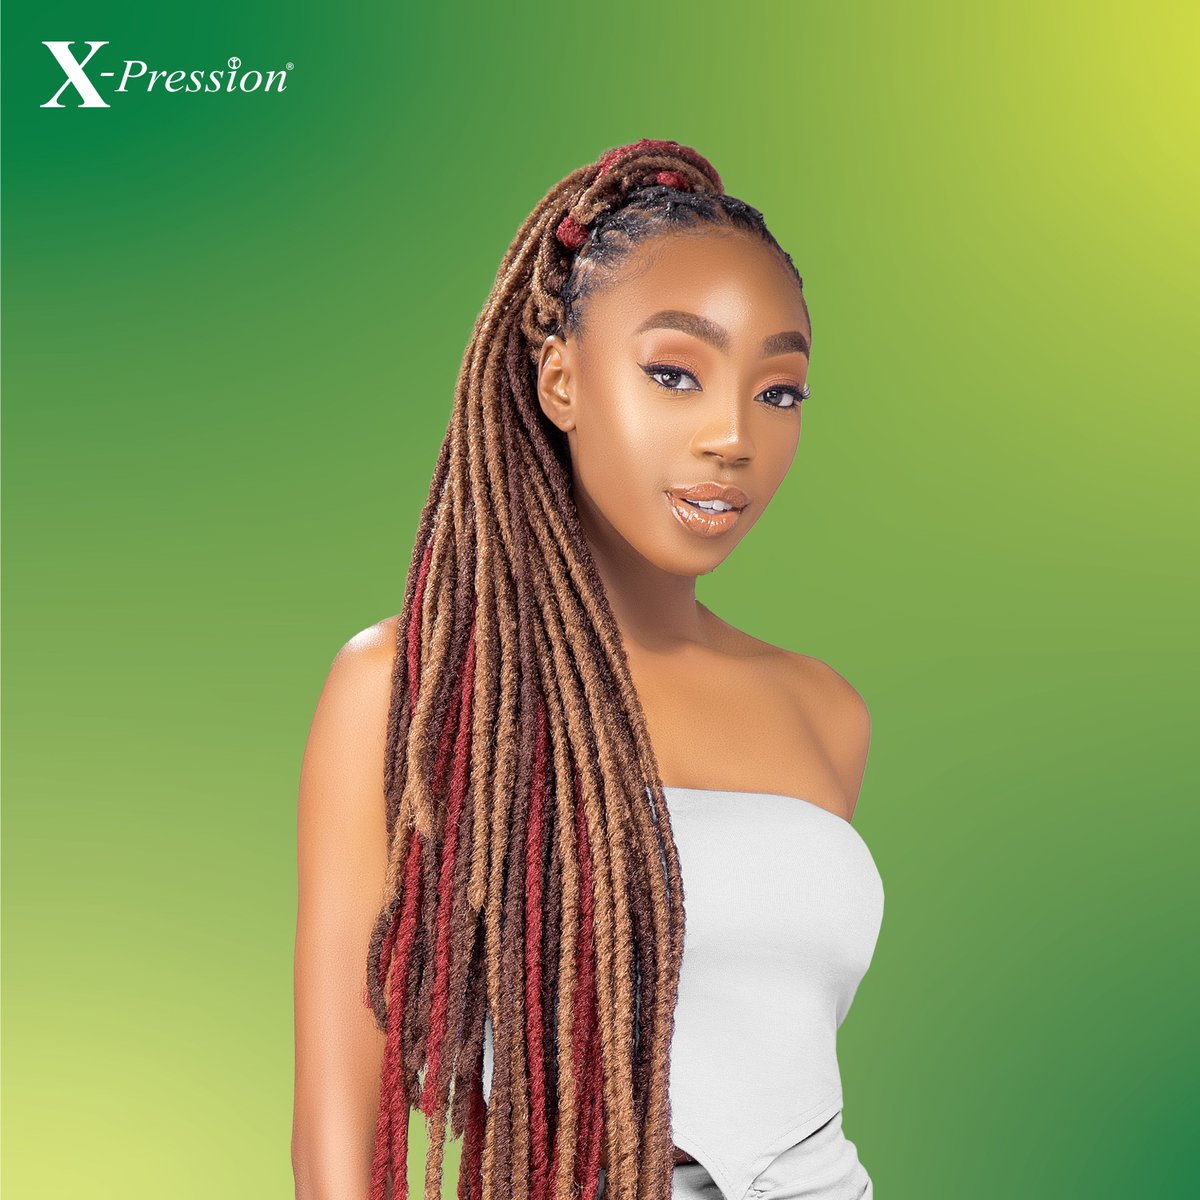 Bahama Locs: the perfect choice for confident women who own their style and embrace their beauty effortlessly. 📷📷 #xp4you #xpression #xpressionhair #BahamaLocs #BahamaLocs #locs #ConfidenceIsKey #Bahamas #beauty #style